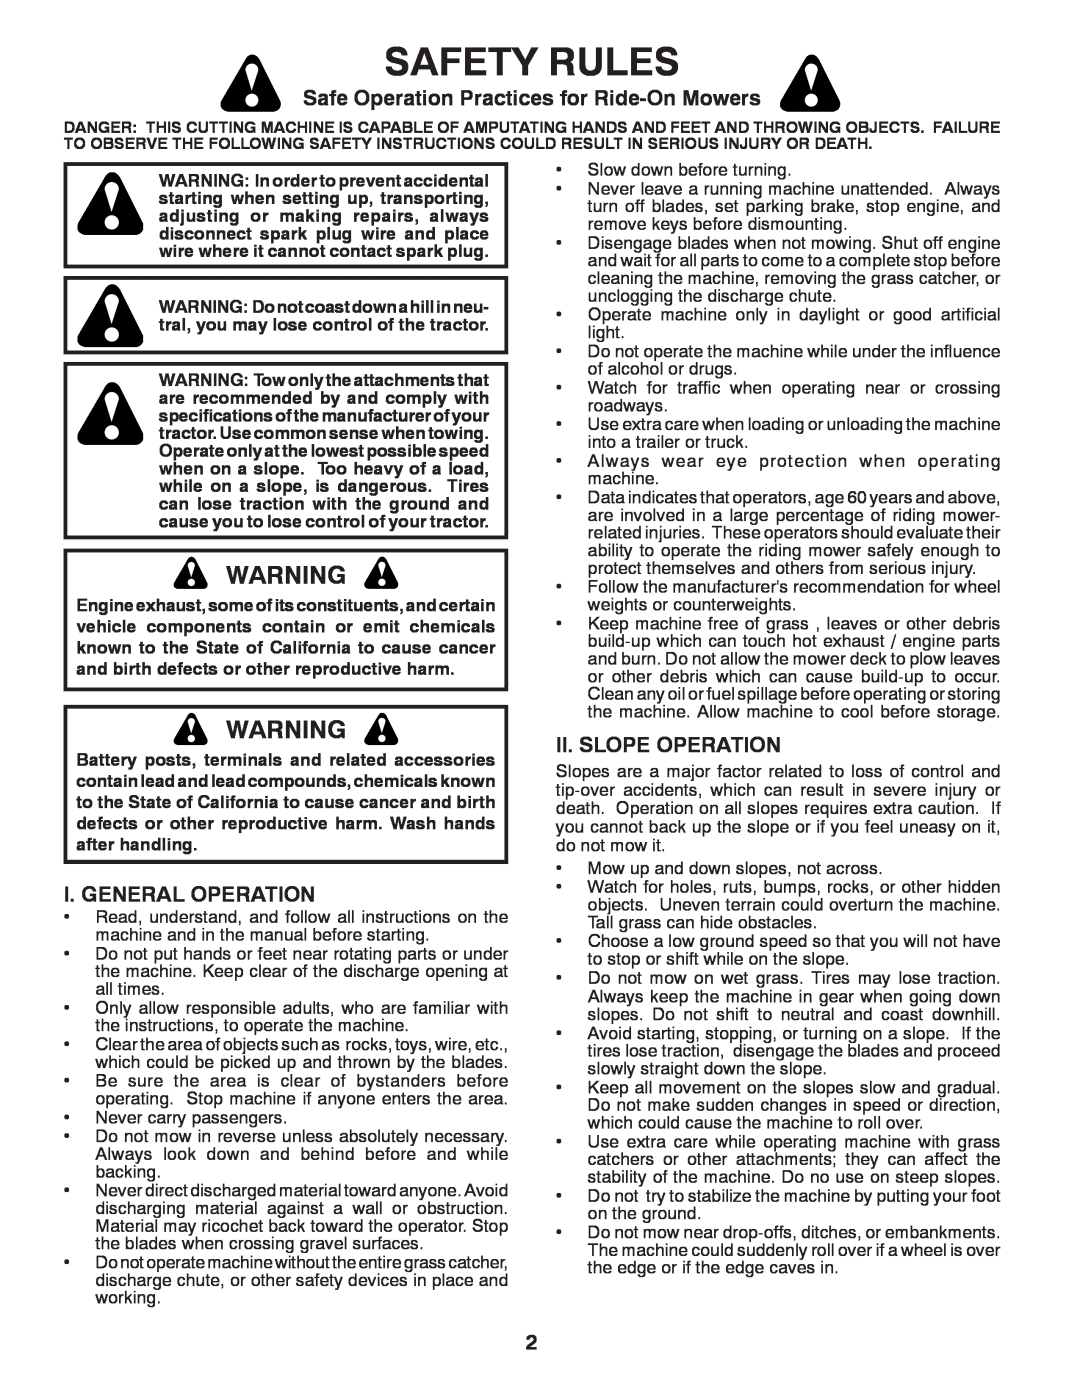 Poulan 532 43 84-93 Safety Rules, Safe Operation Practices for Ride-On Mowers, I. General Operation, Ii. Slope Operation 